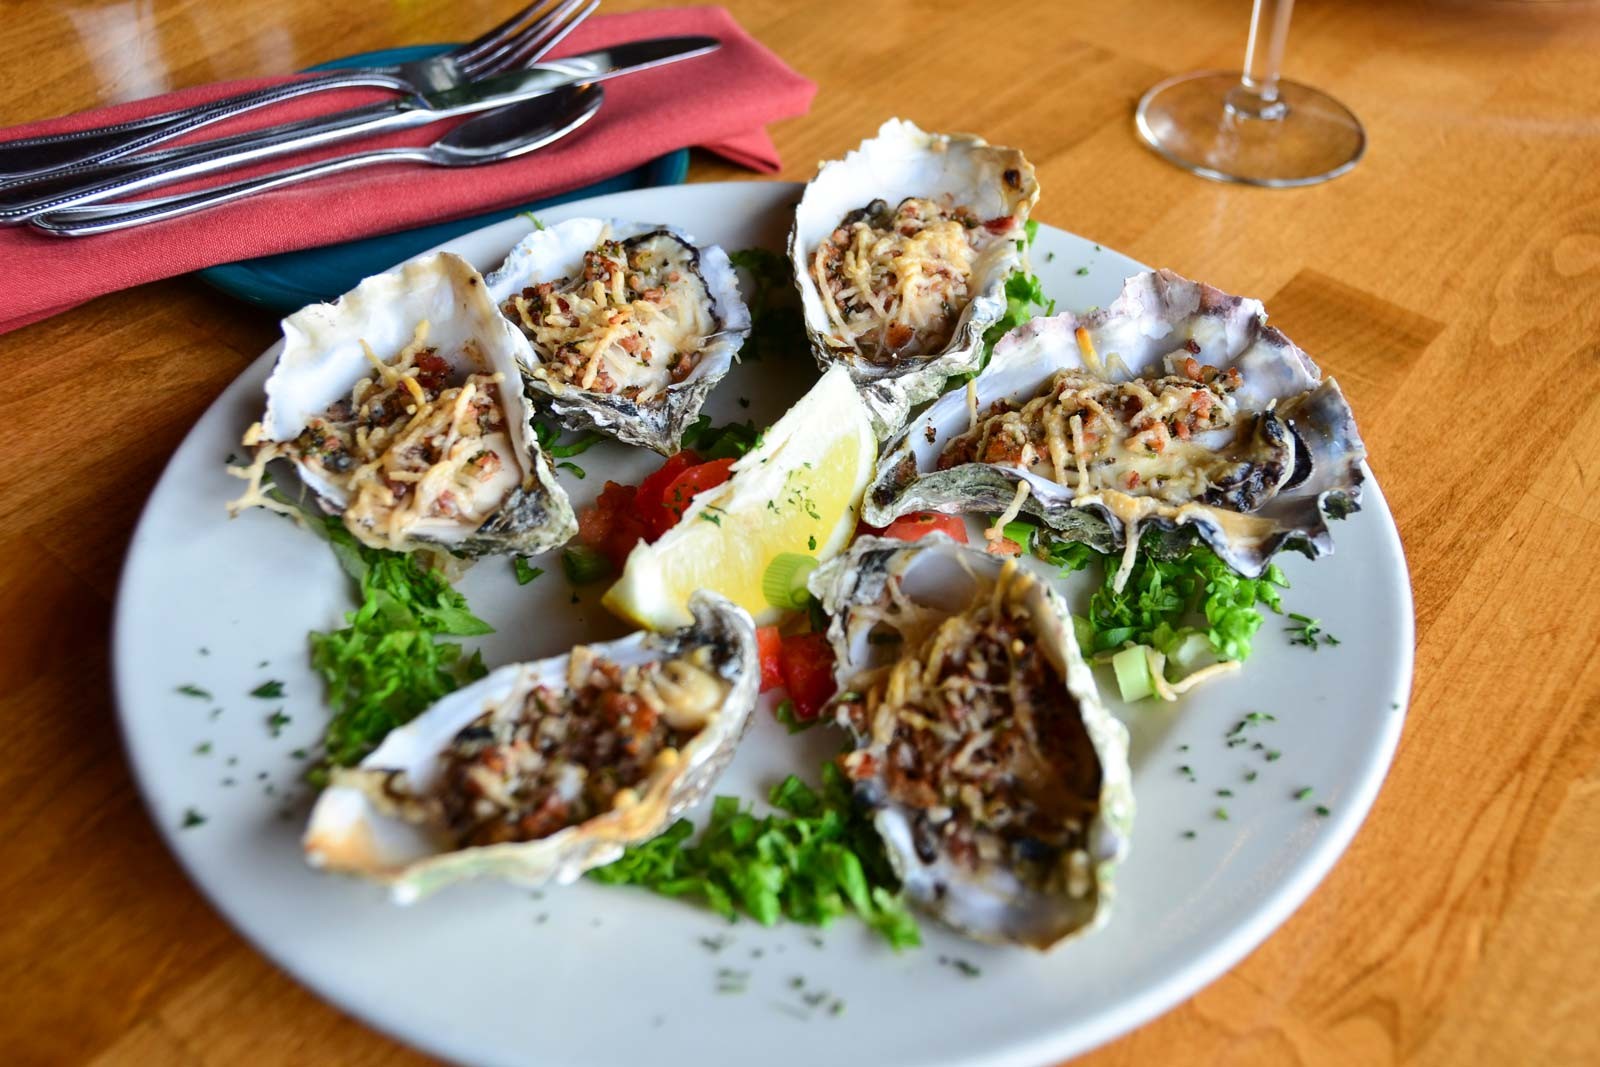 The fruits of the bay: oysters at Café Waterfront. - PHOTO BY DREW HYLAND